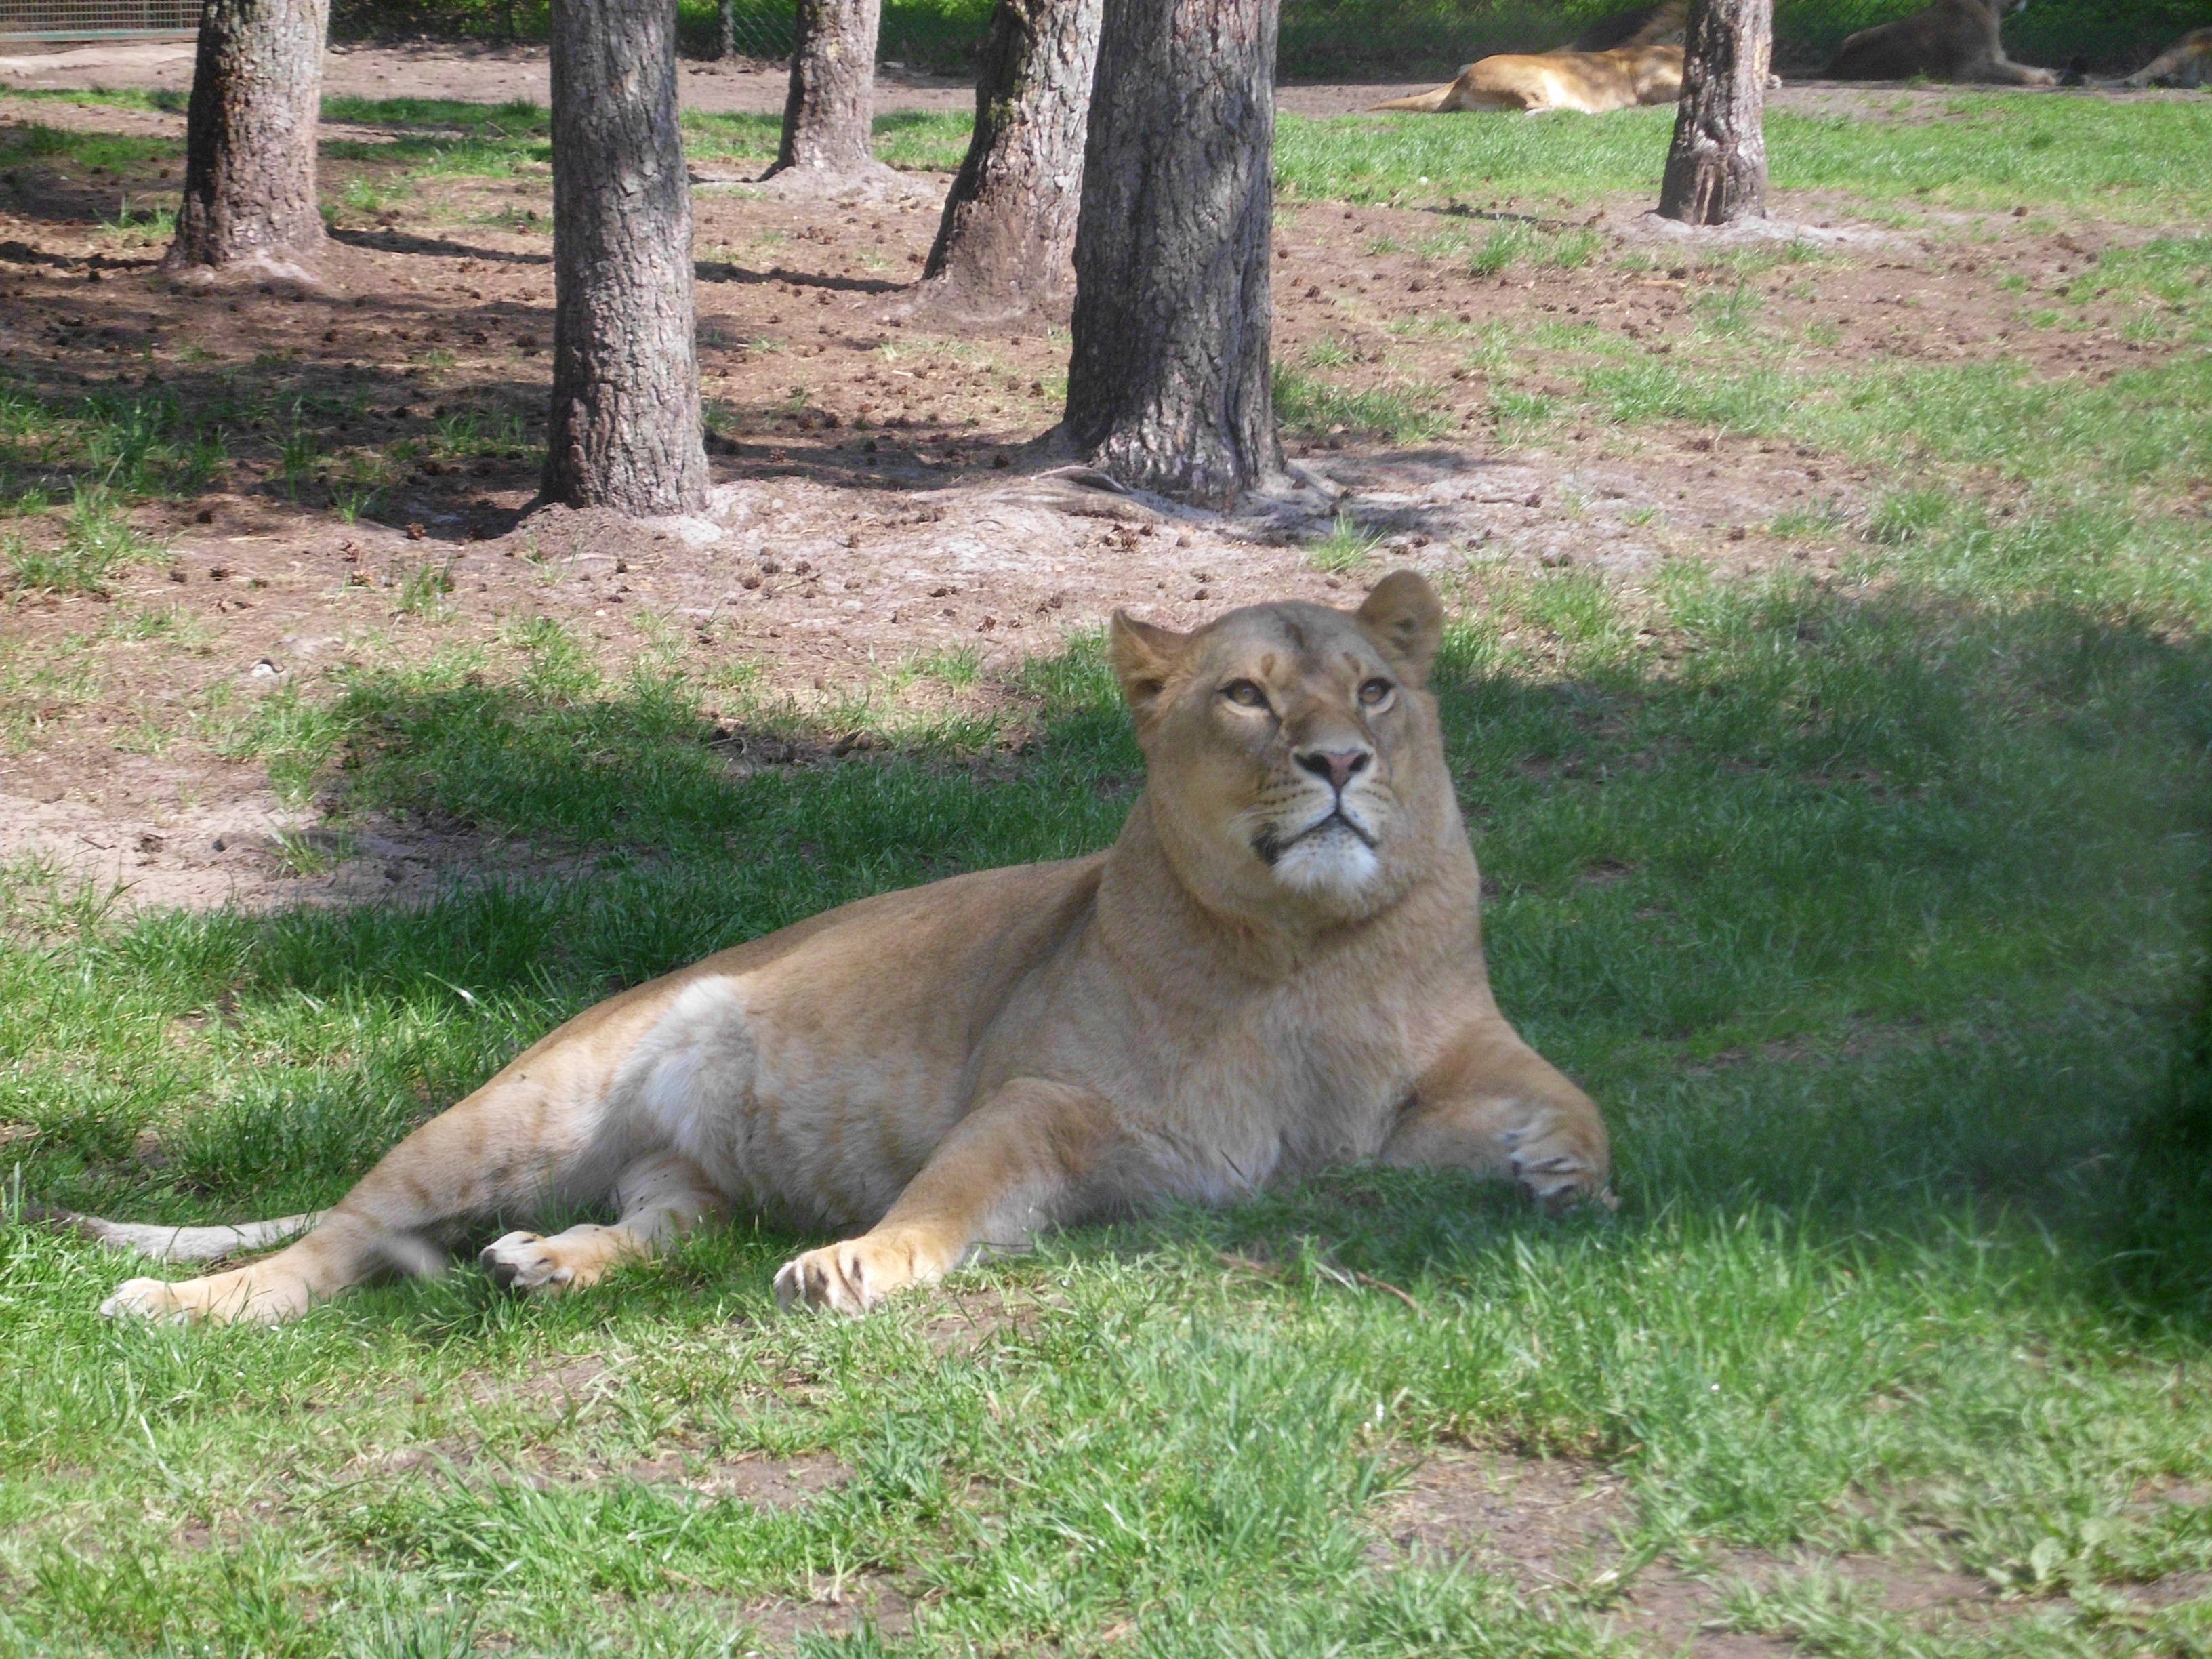 brown liger lying on grass field during daytime